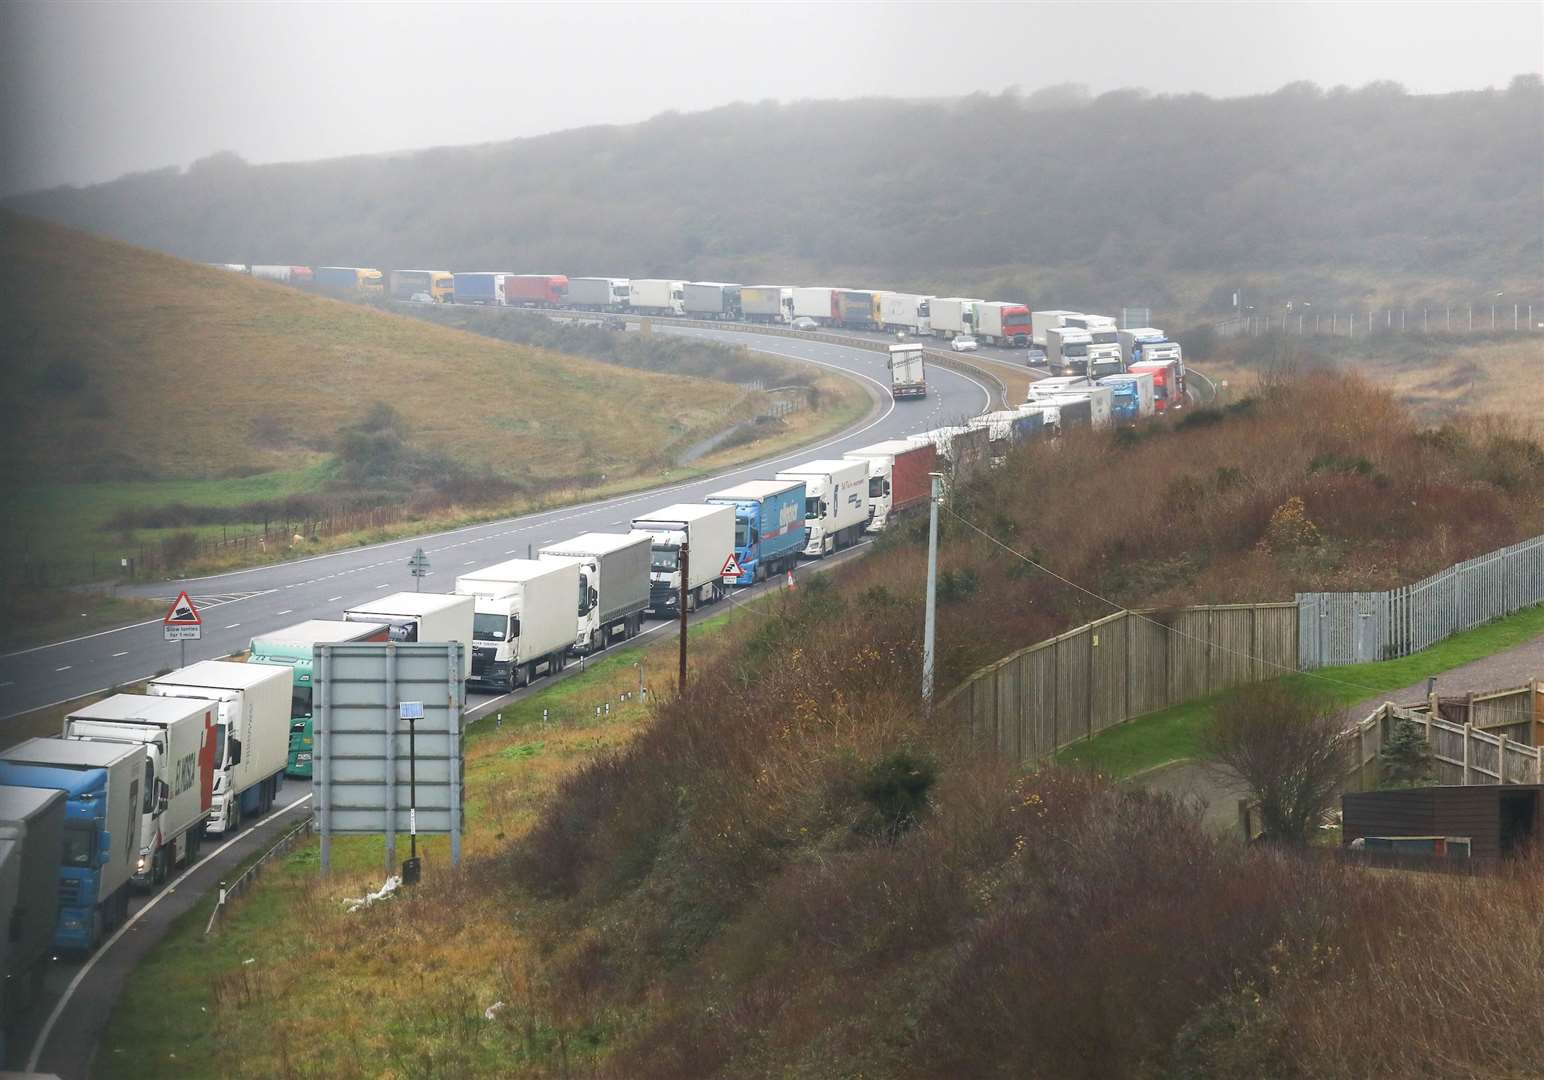 Dover TAP (traffic assessment project) has been in force today between the Western Heights roundabout and Hawkinge to control traffic flows during the busy Christmas period. Picture: UKNIP